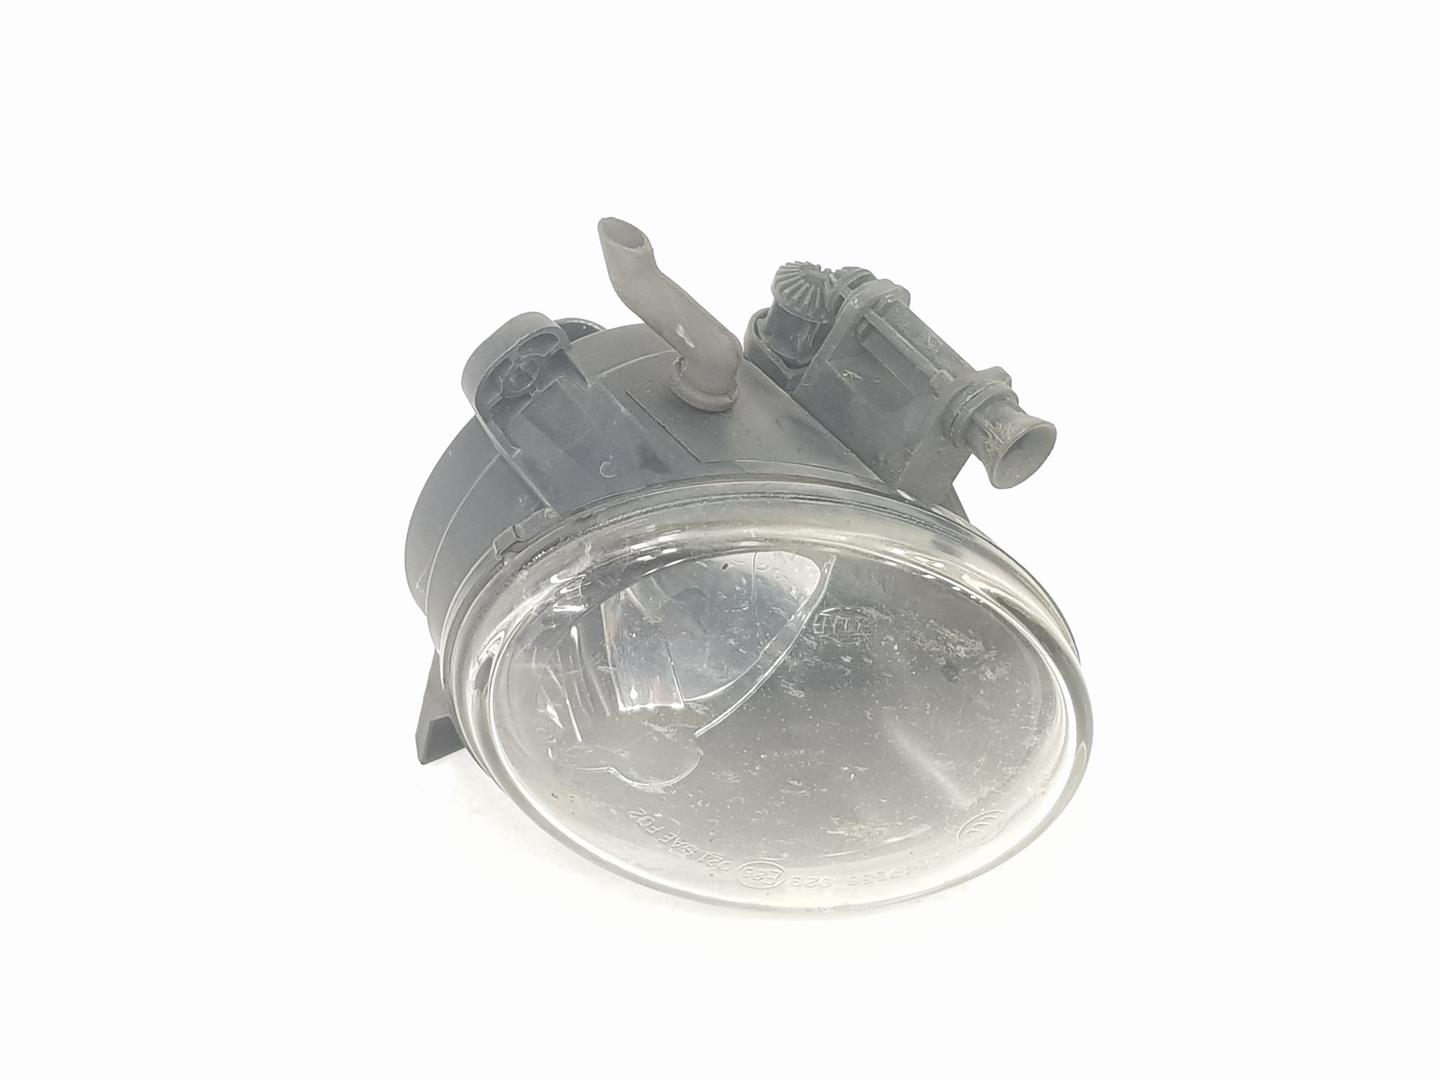 SEAT Exeo 1 generation (2009-2012) Front Left Fog Light 8T0941699A, 8T0941699A 24220875